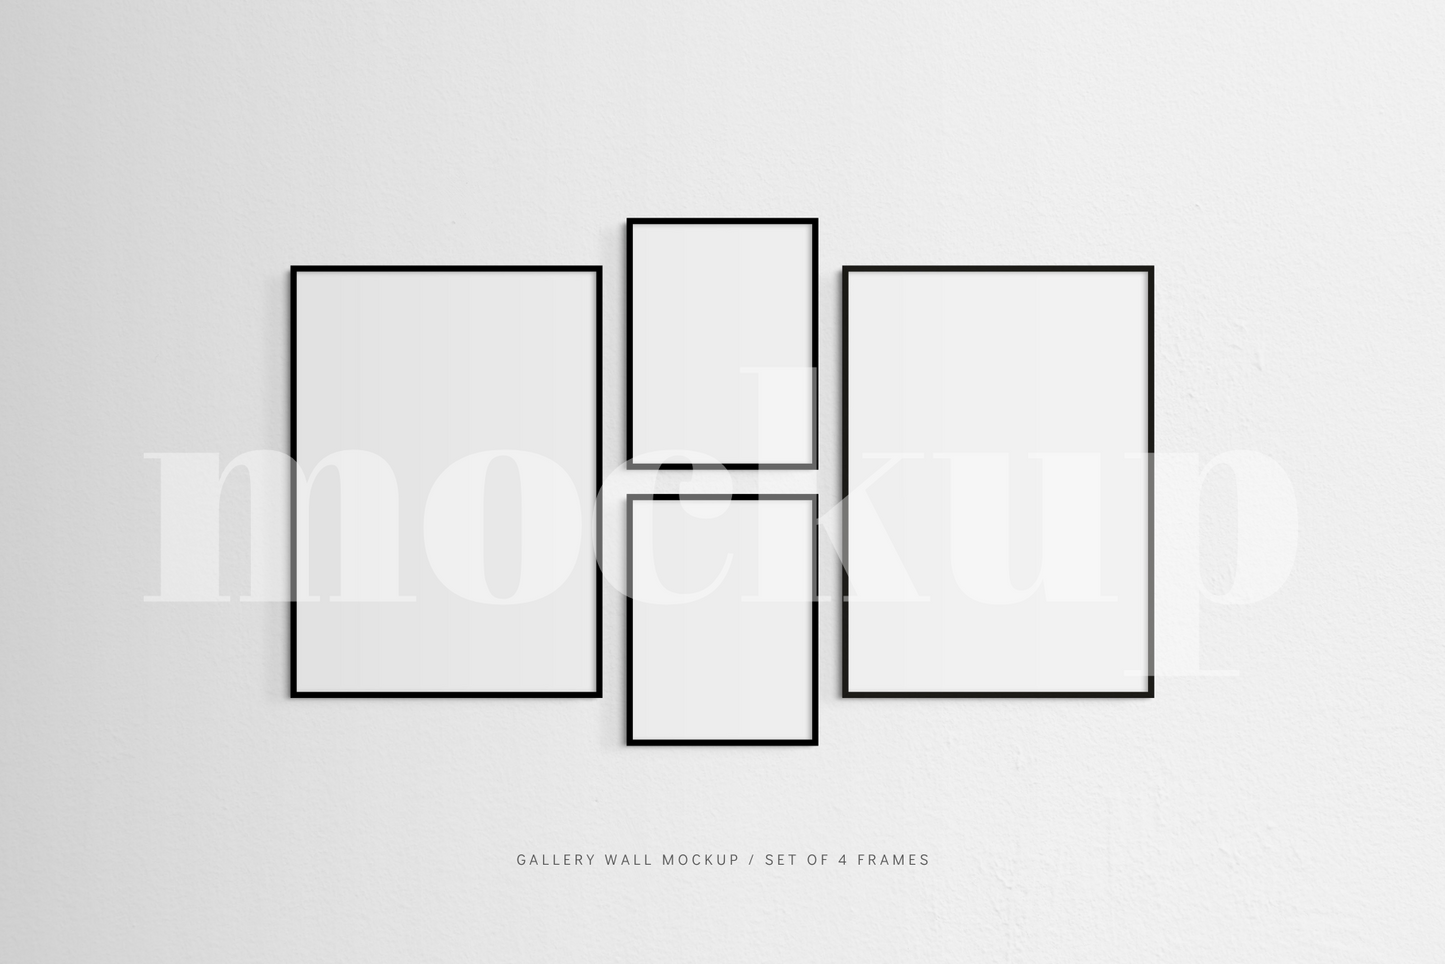 A modern, minimalist gallery wall mockup that features a set of 4 thin black frames.